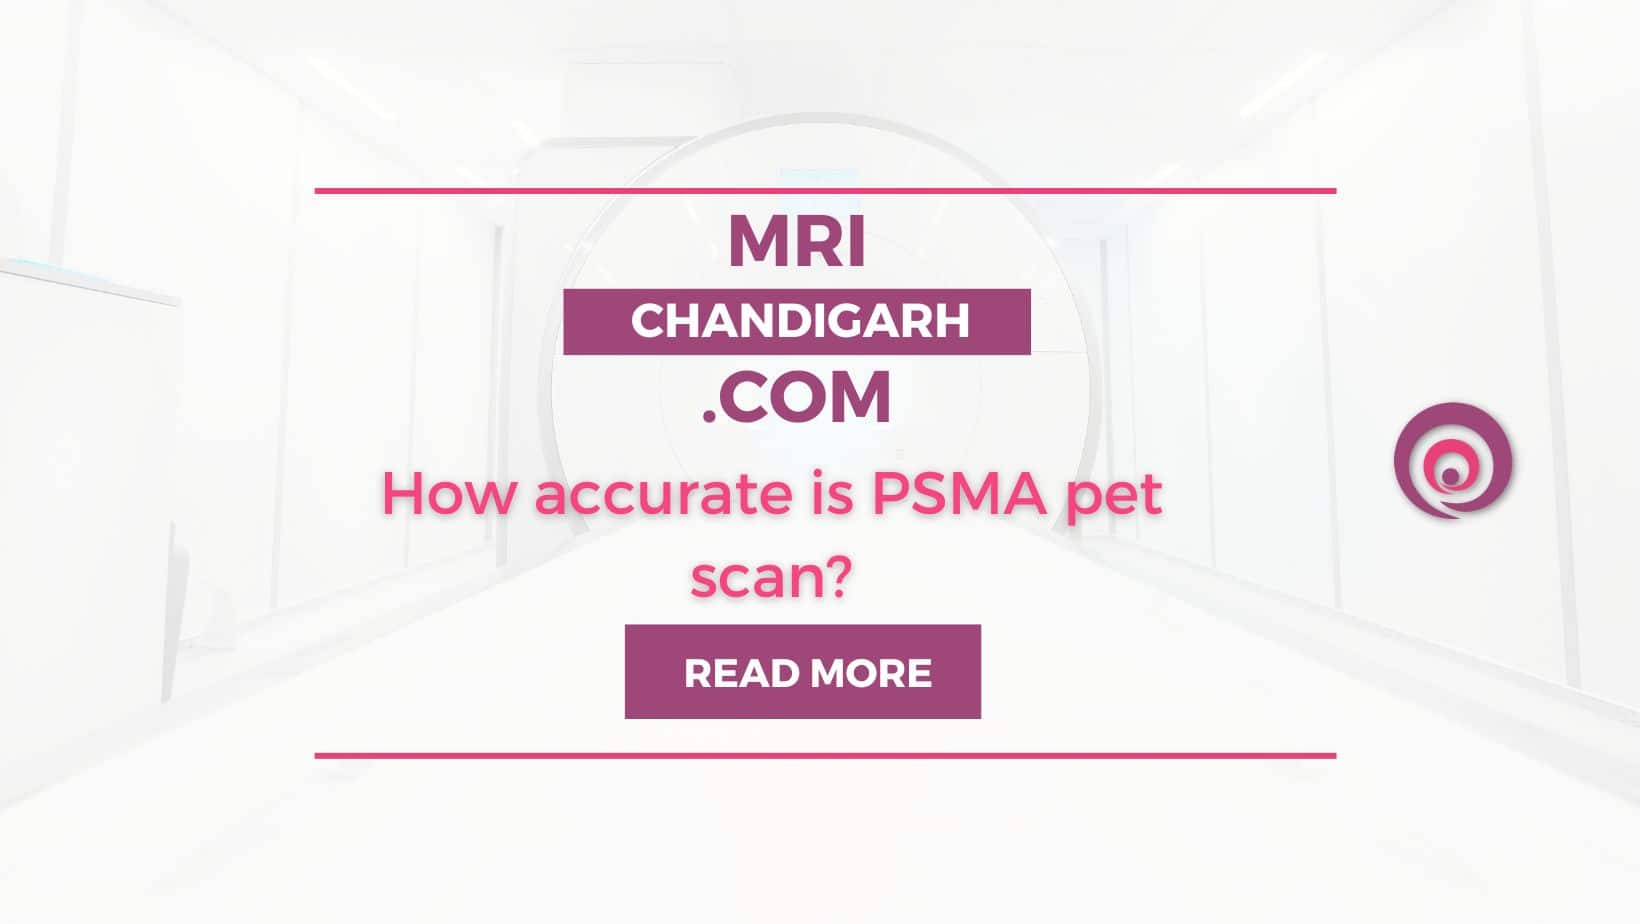 How accurate is PSMA pet scan?